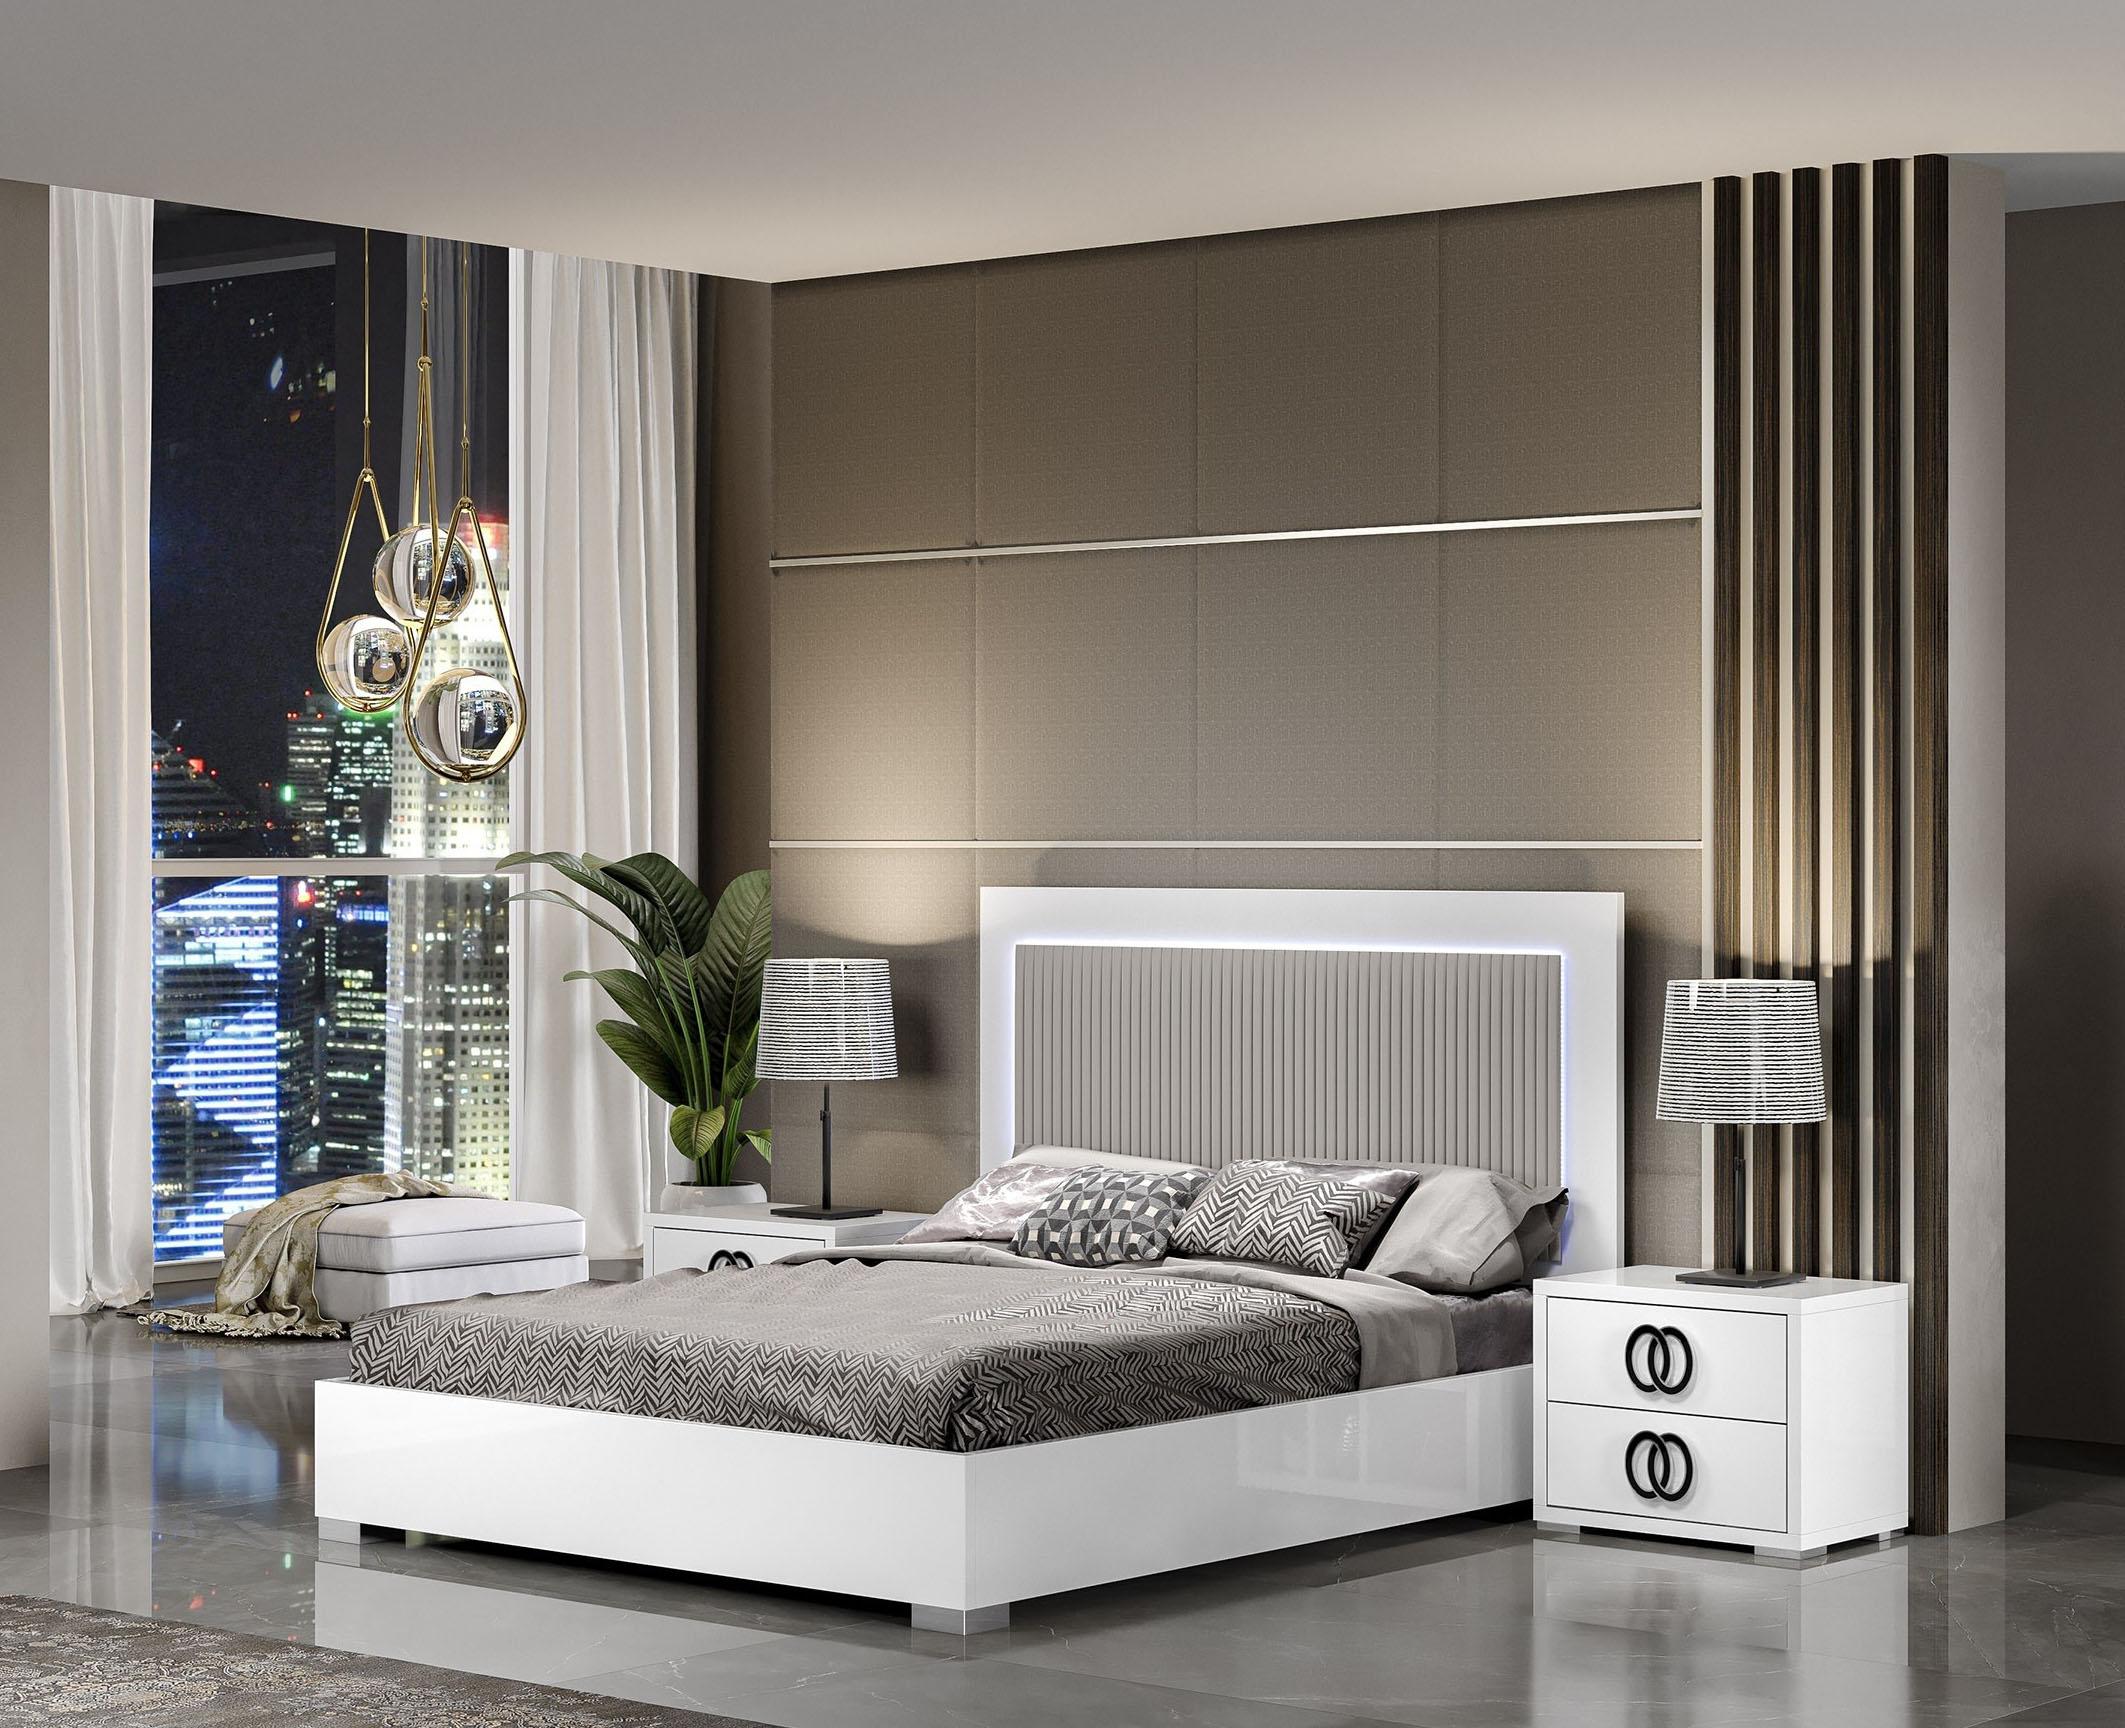 

    
Premium King Size Bedroom Set 5Pcs in White w/ LED light MADE IN ITALY J&M Luxuria
